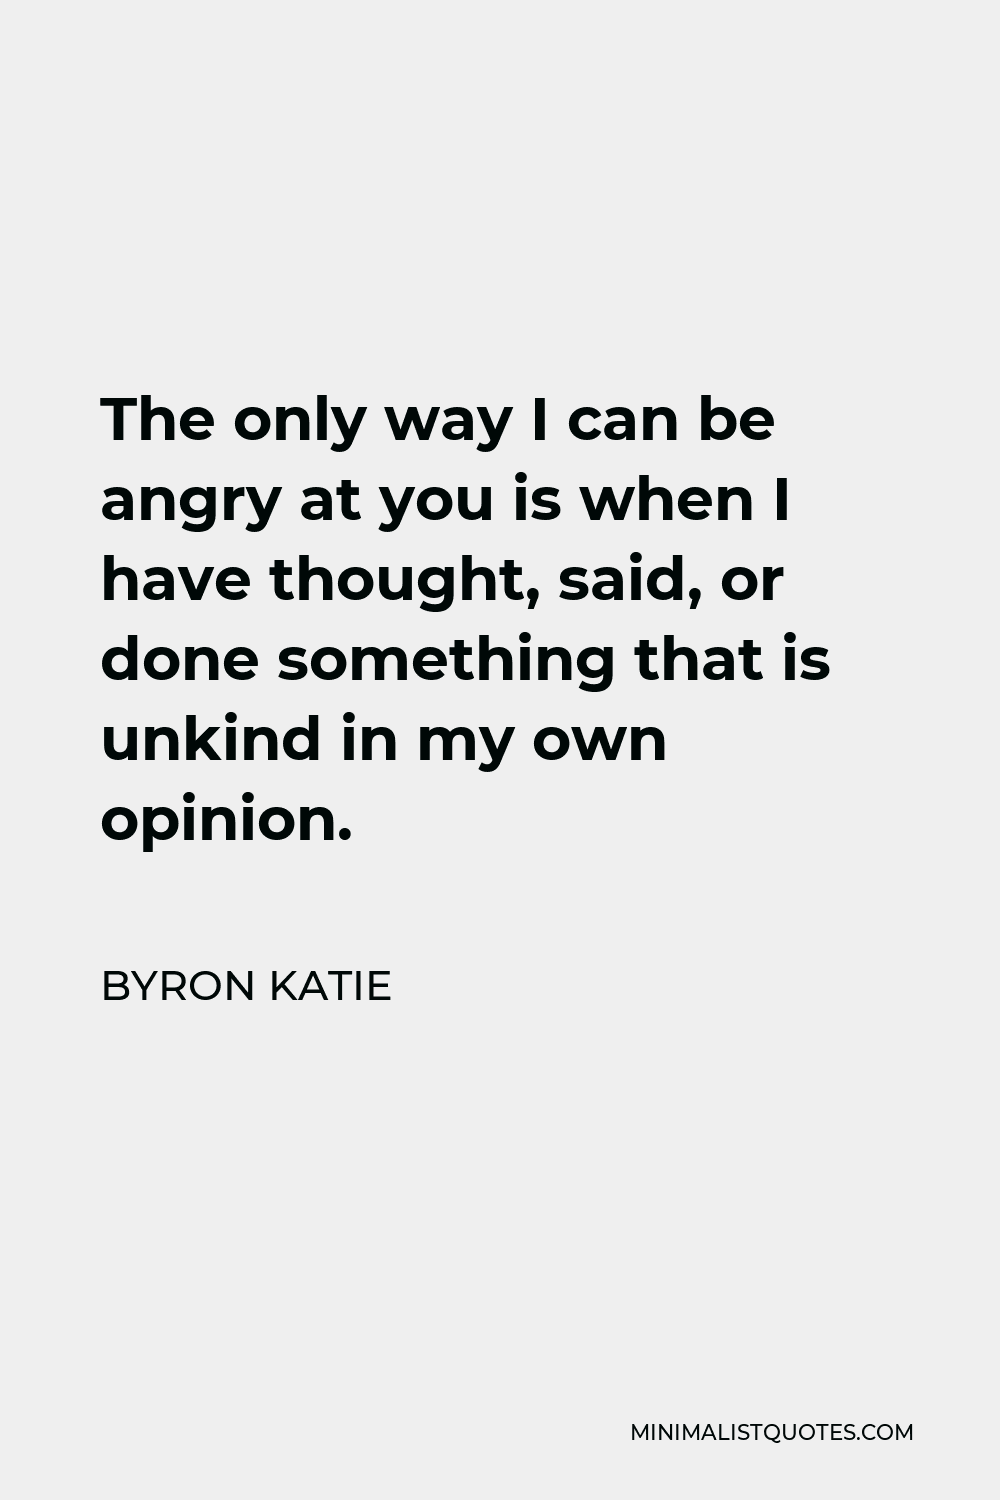 Byron Katie Quote - The only way I can be angry at you is when I have thought, said, or done something that is unkind in my own opinion.